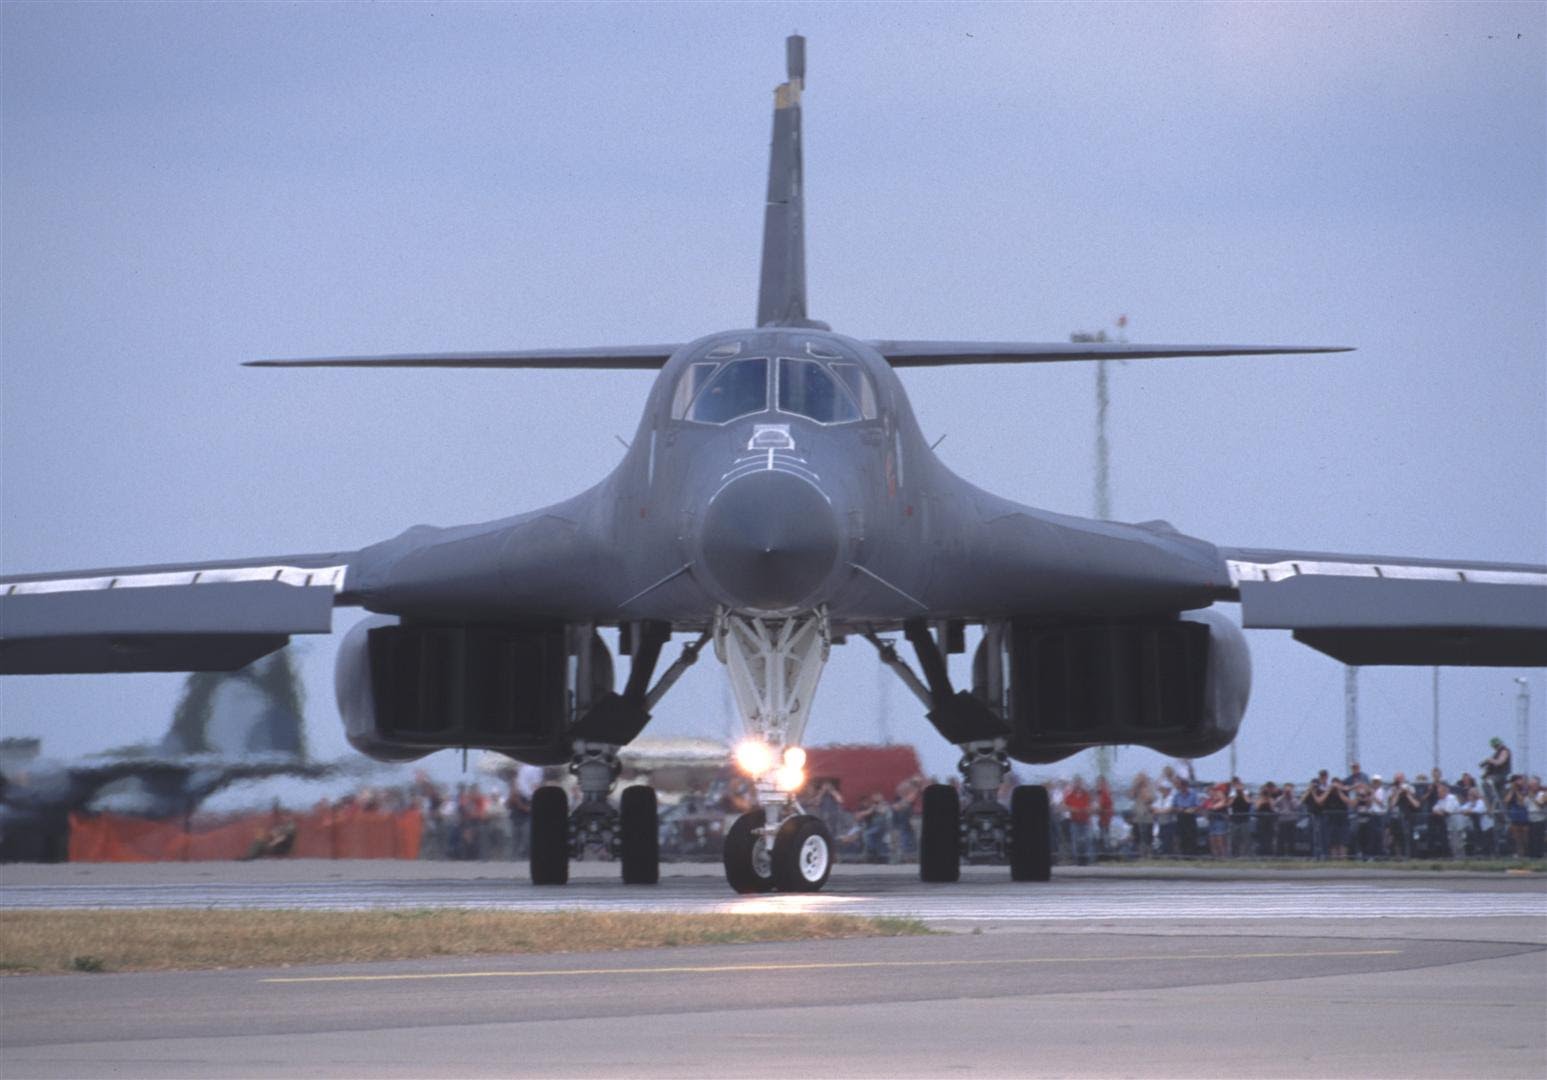 Amazing Rockwell B-1 Lancer Pictures & Backgrounds